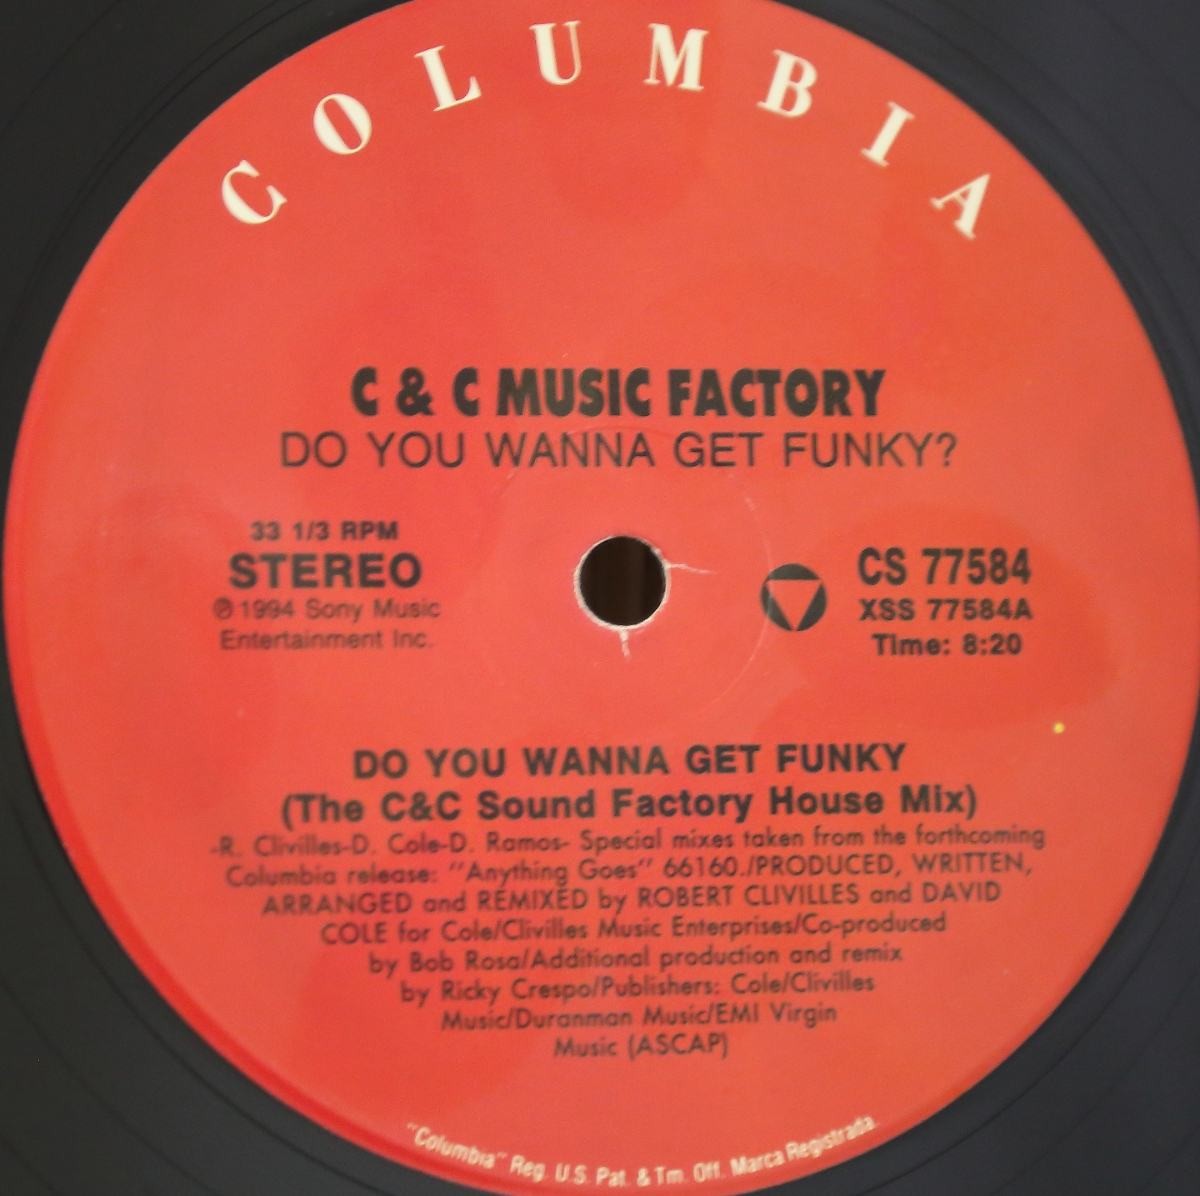 C&C Music Factory - Do you wanna get funky (C&C Sound Factory House mix / The Ministry Of Sound House mix)